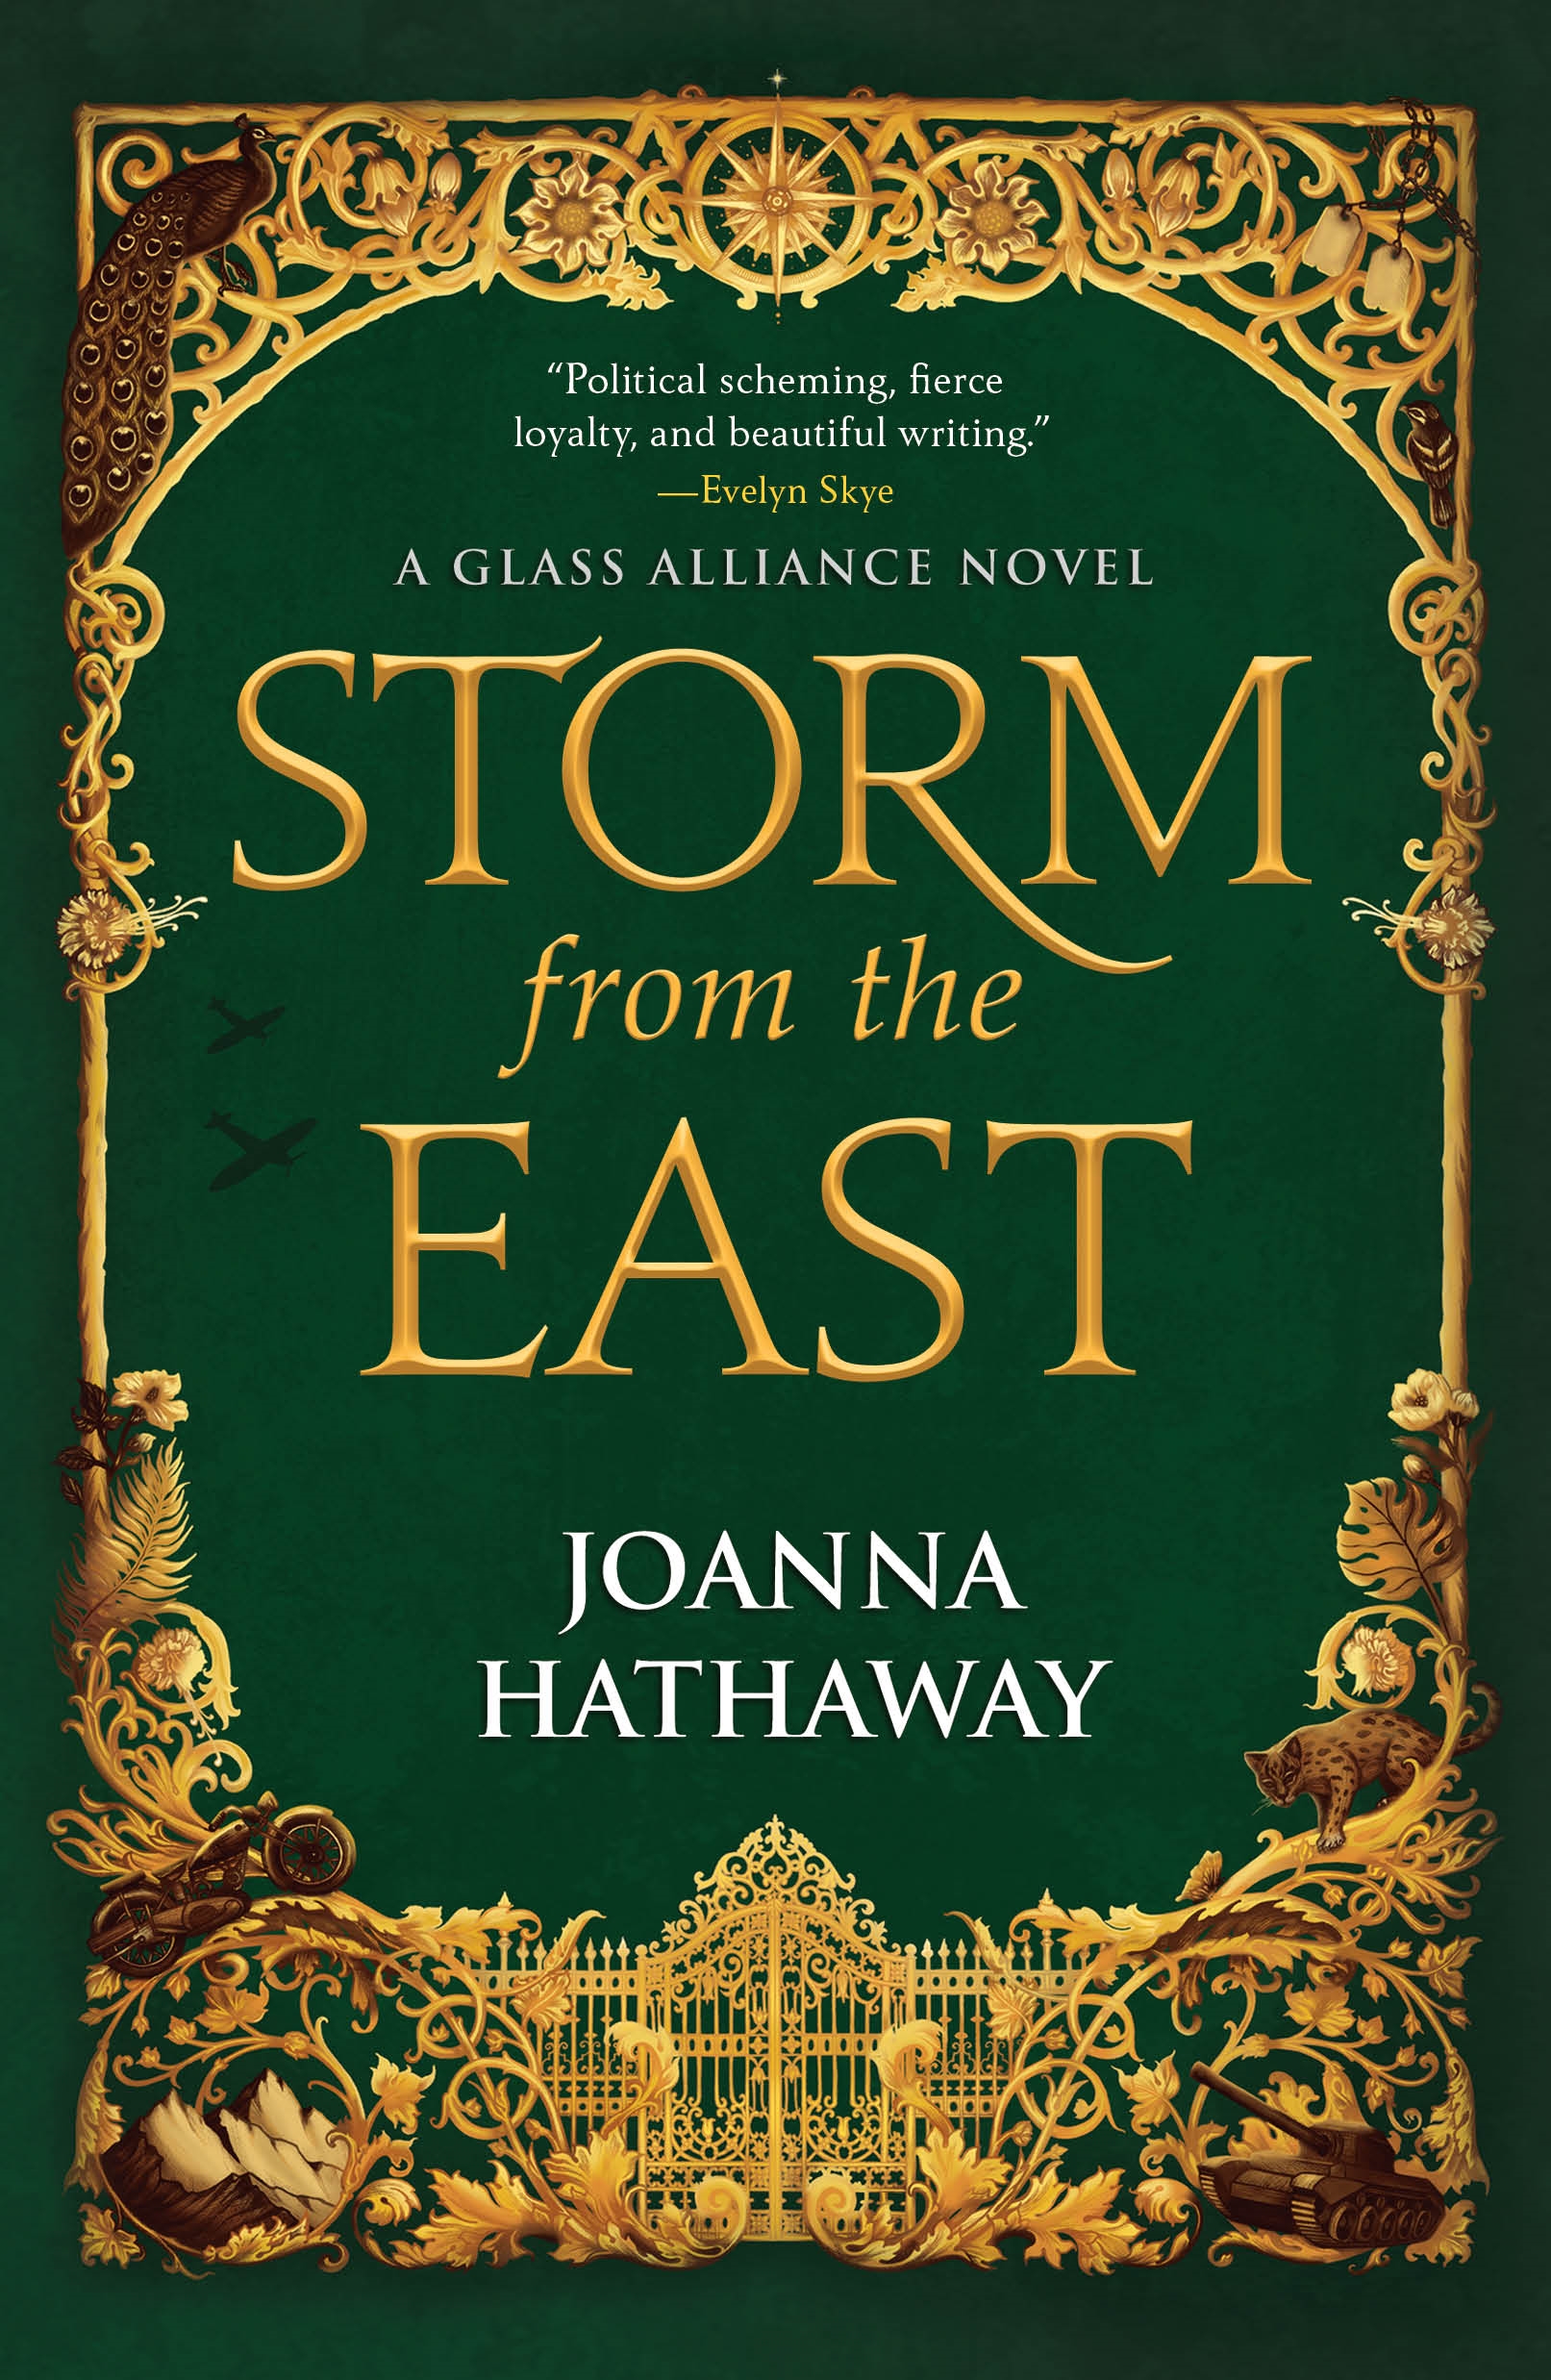 Storm from the East by Joanna Hathaway